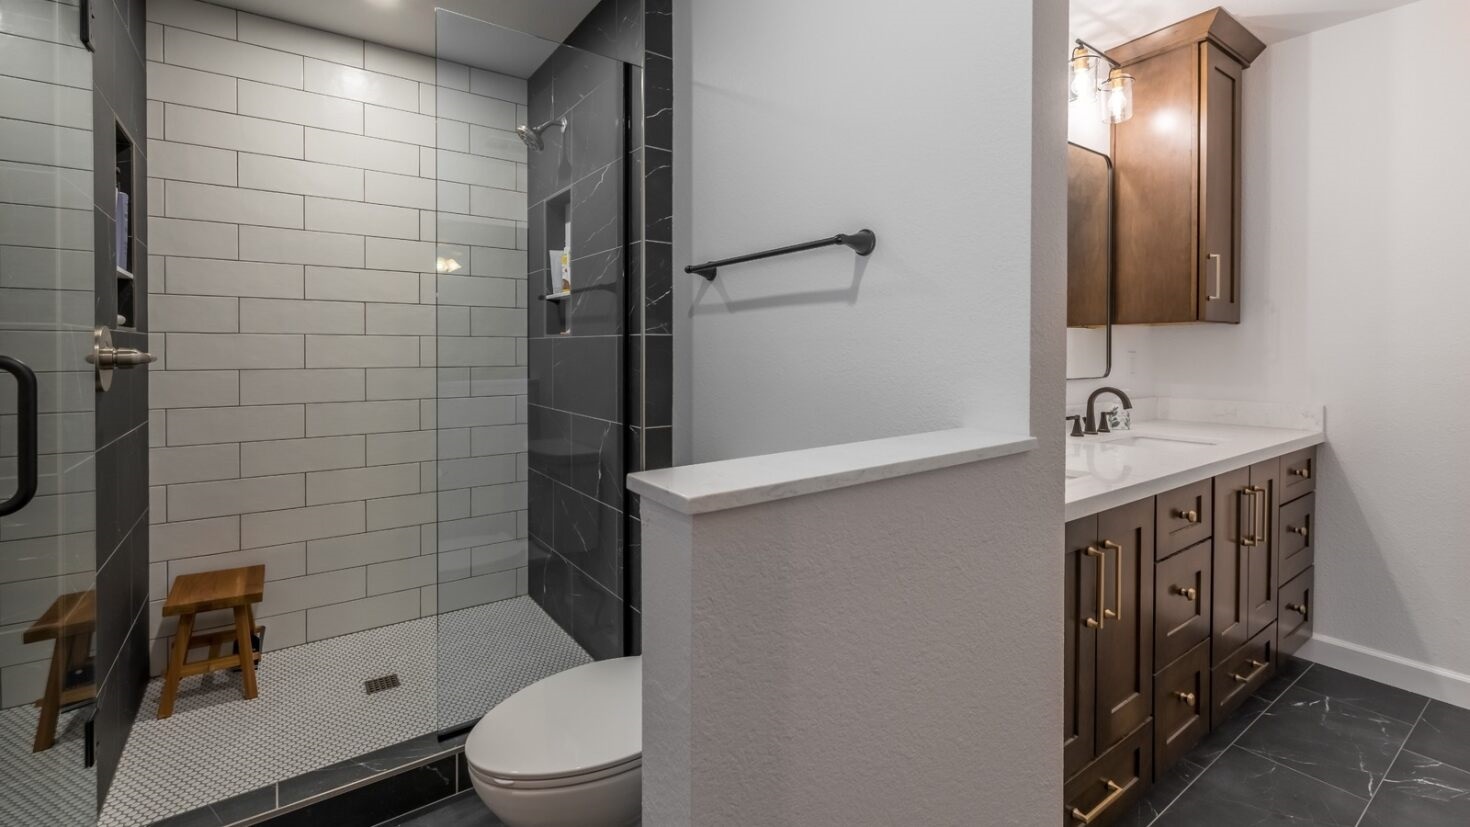 What is the most expensive part of a bathroom remodel